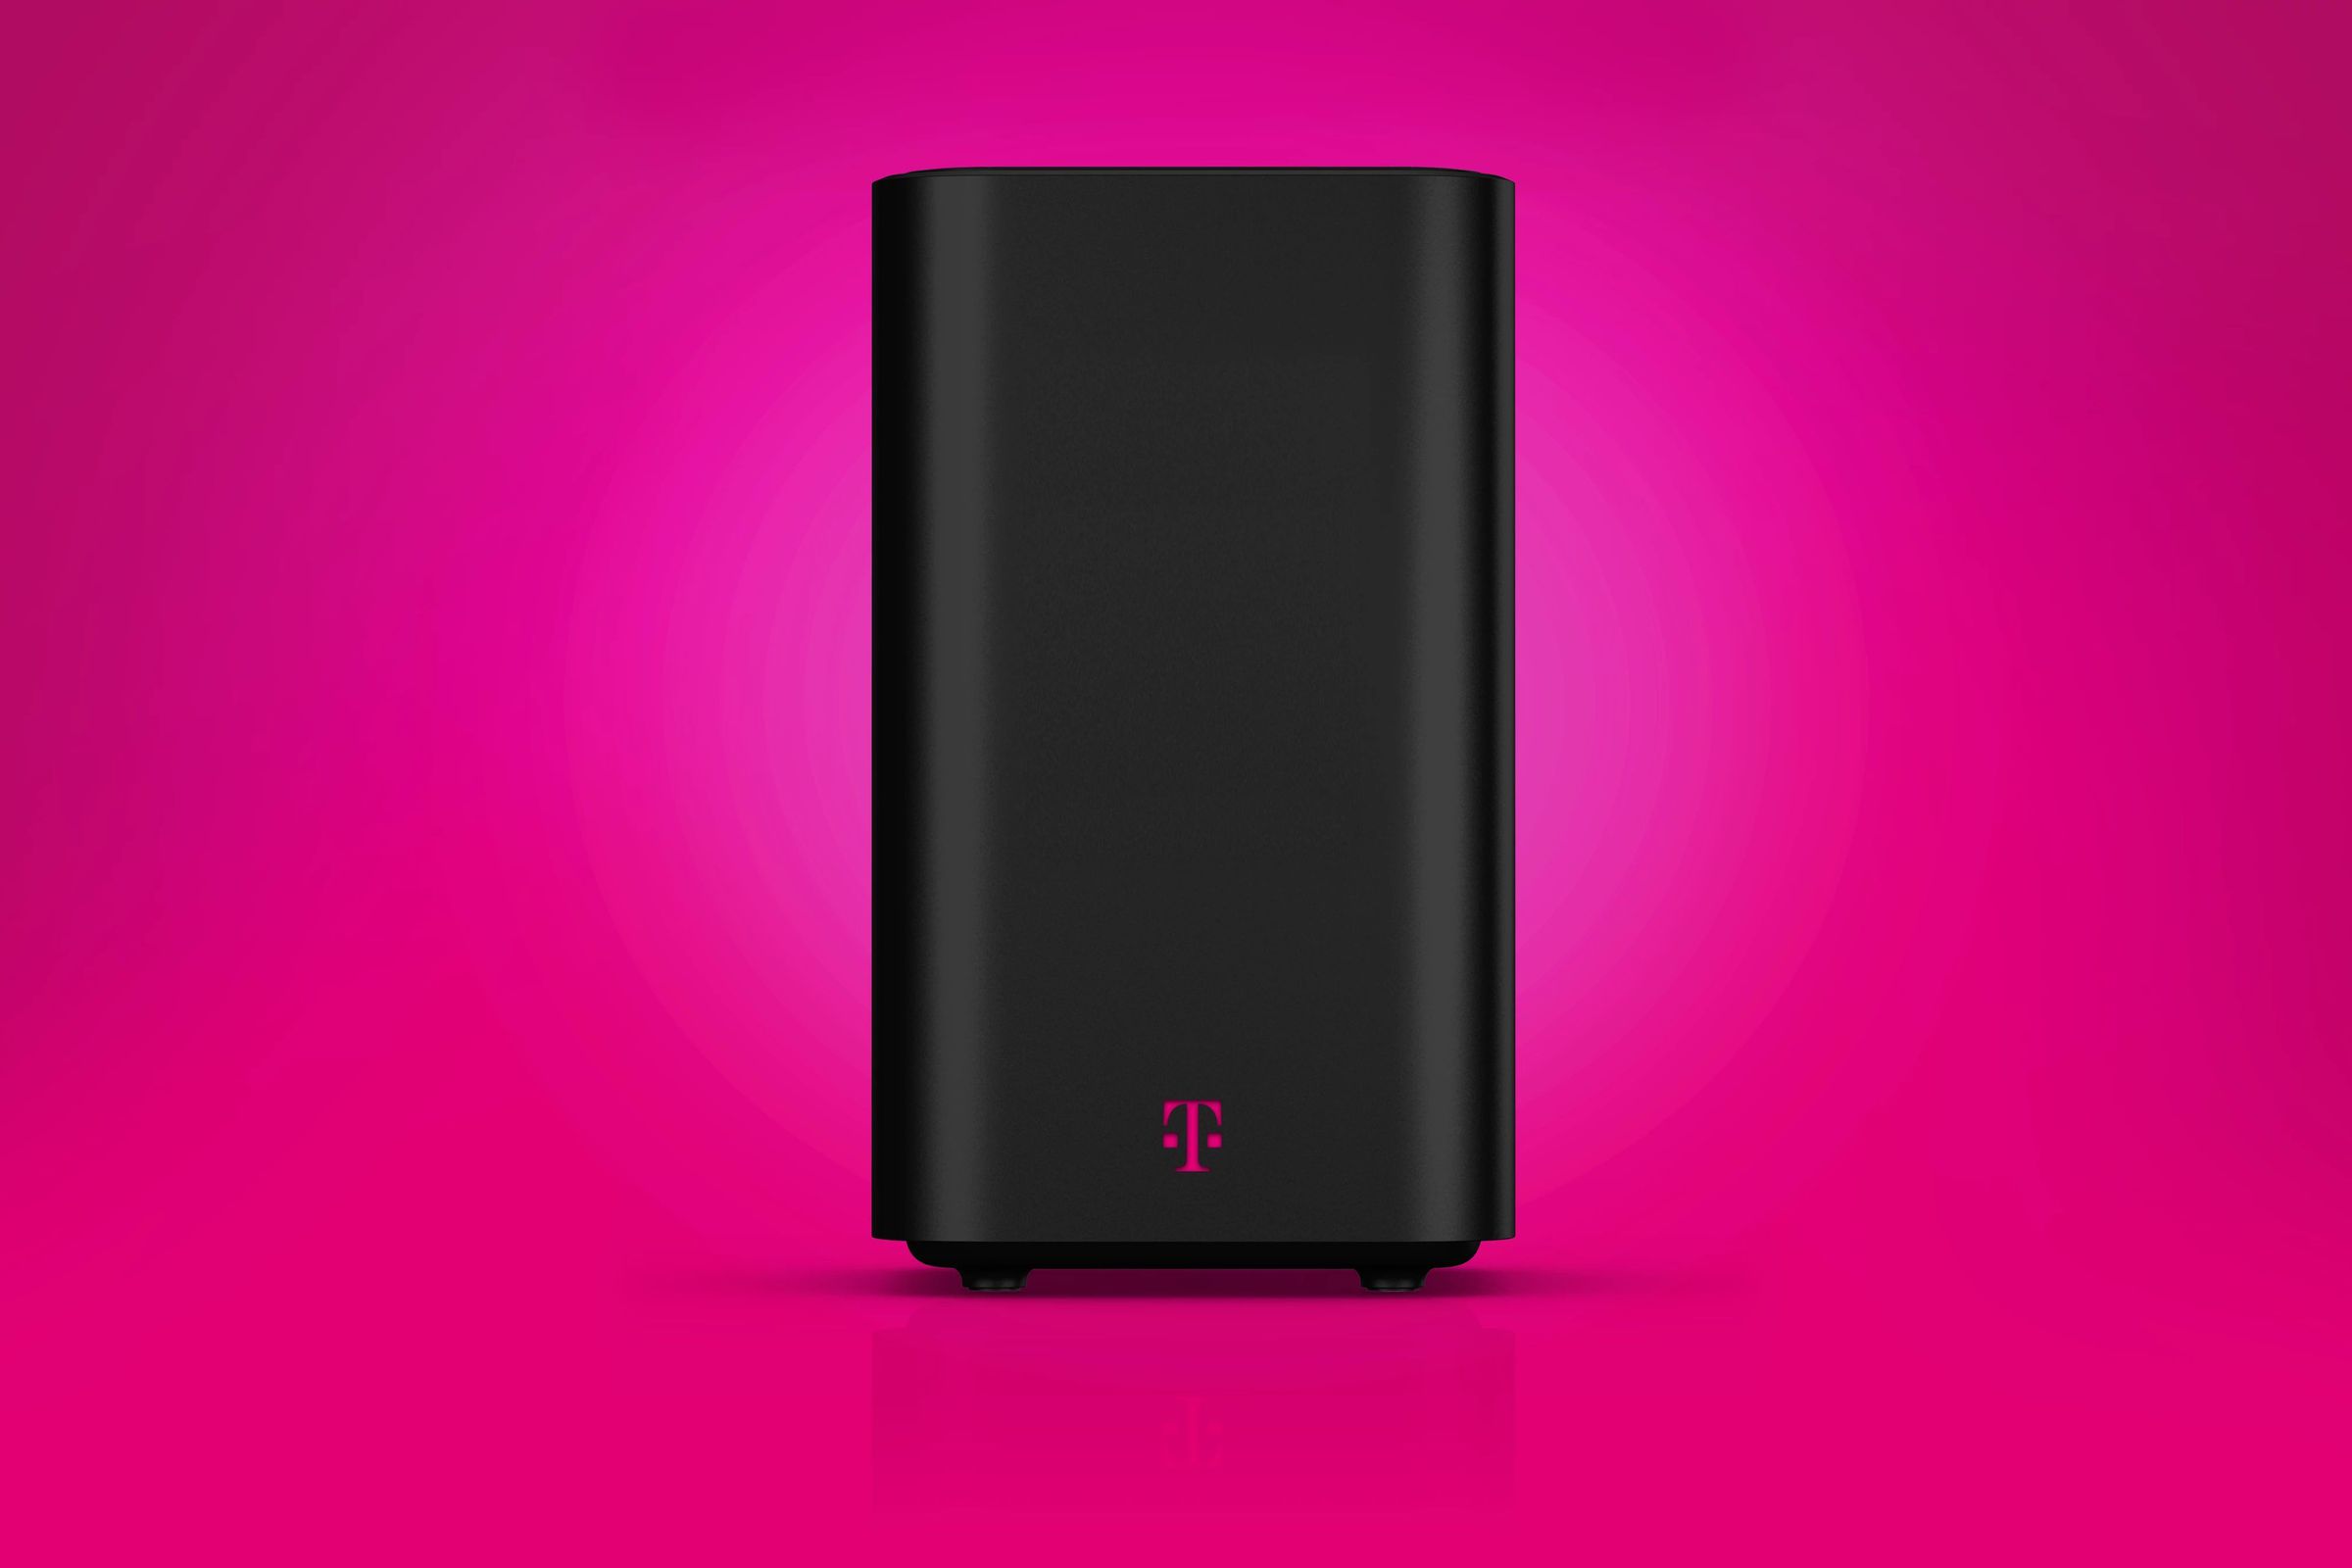 Picture of T-Mobile home internet gateway on a magenta background.